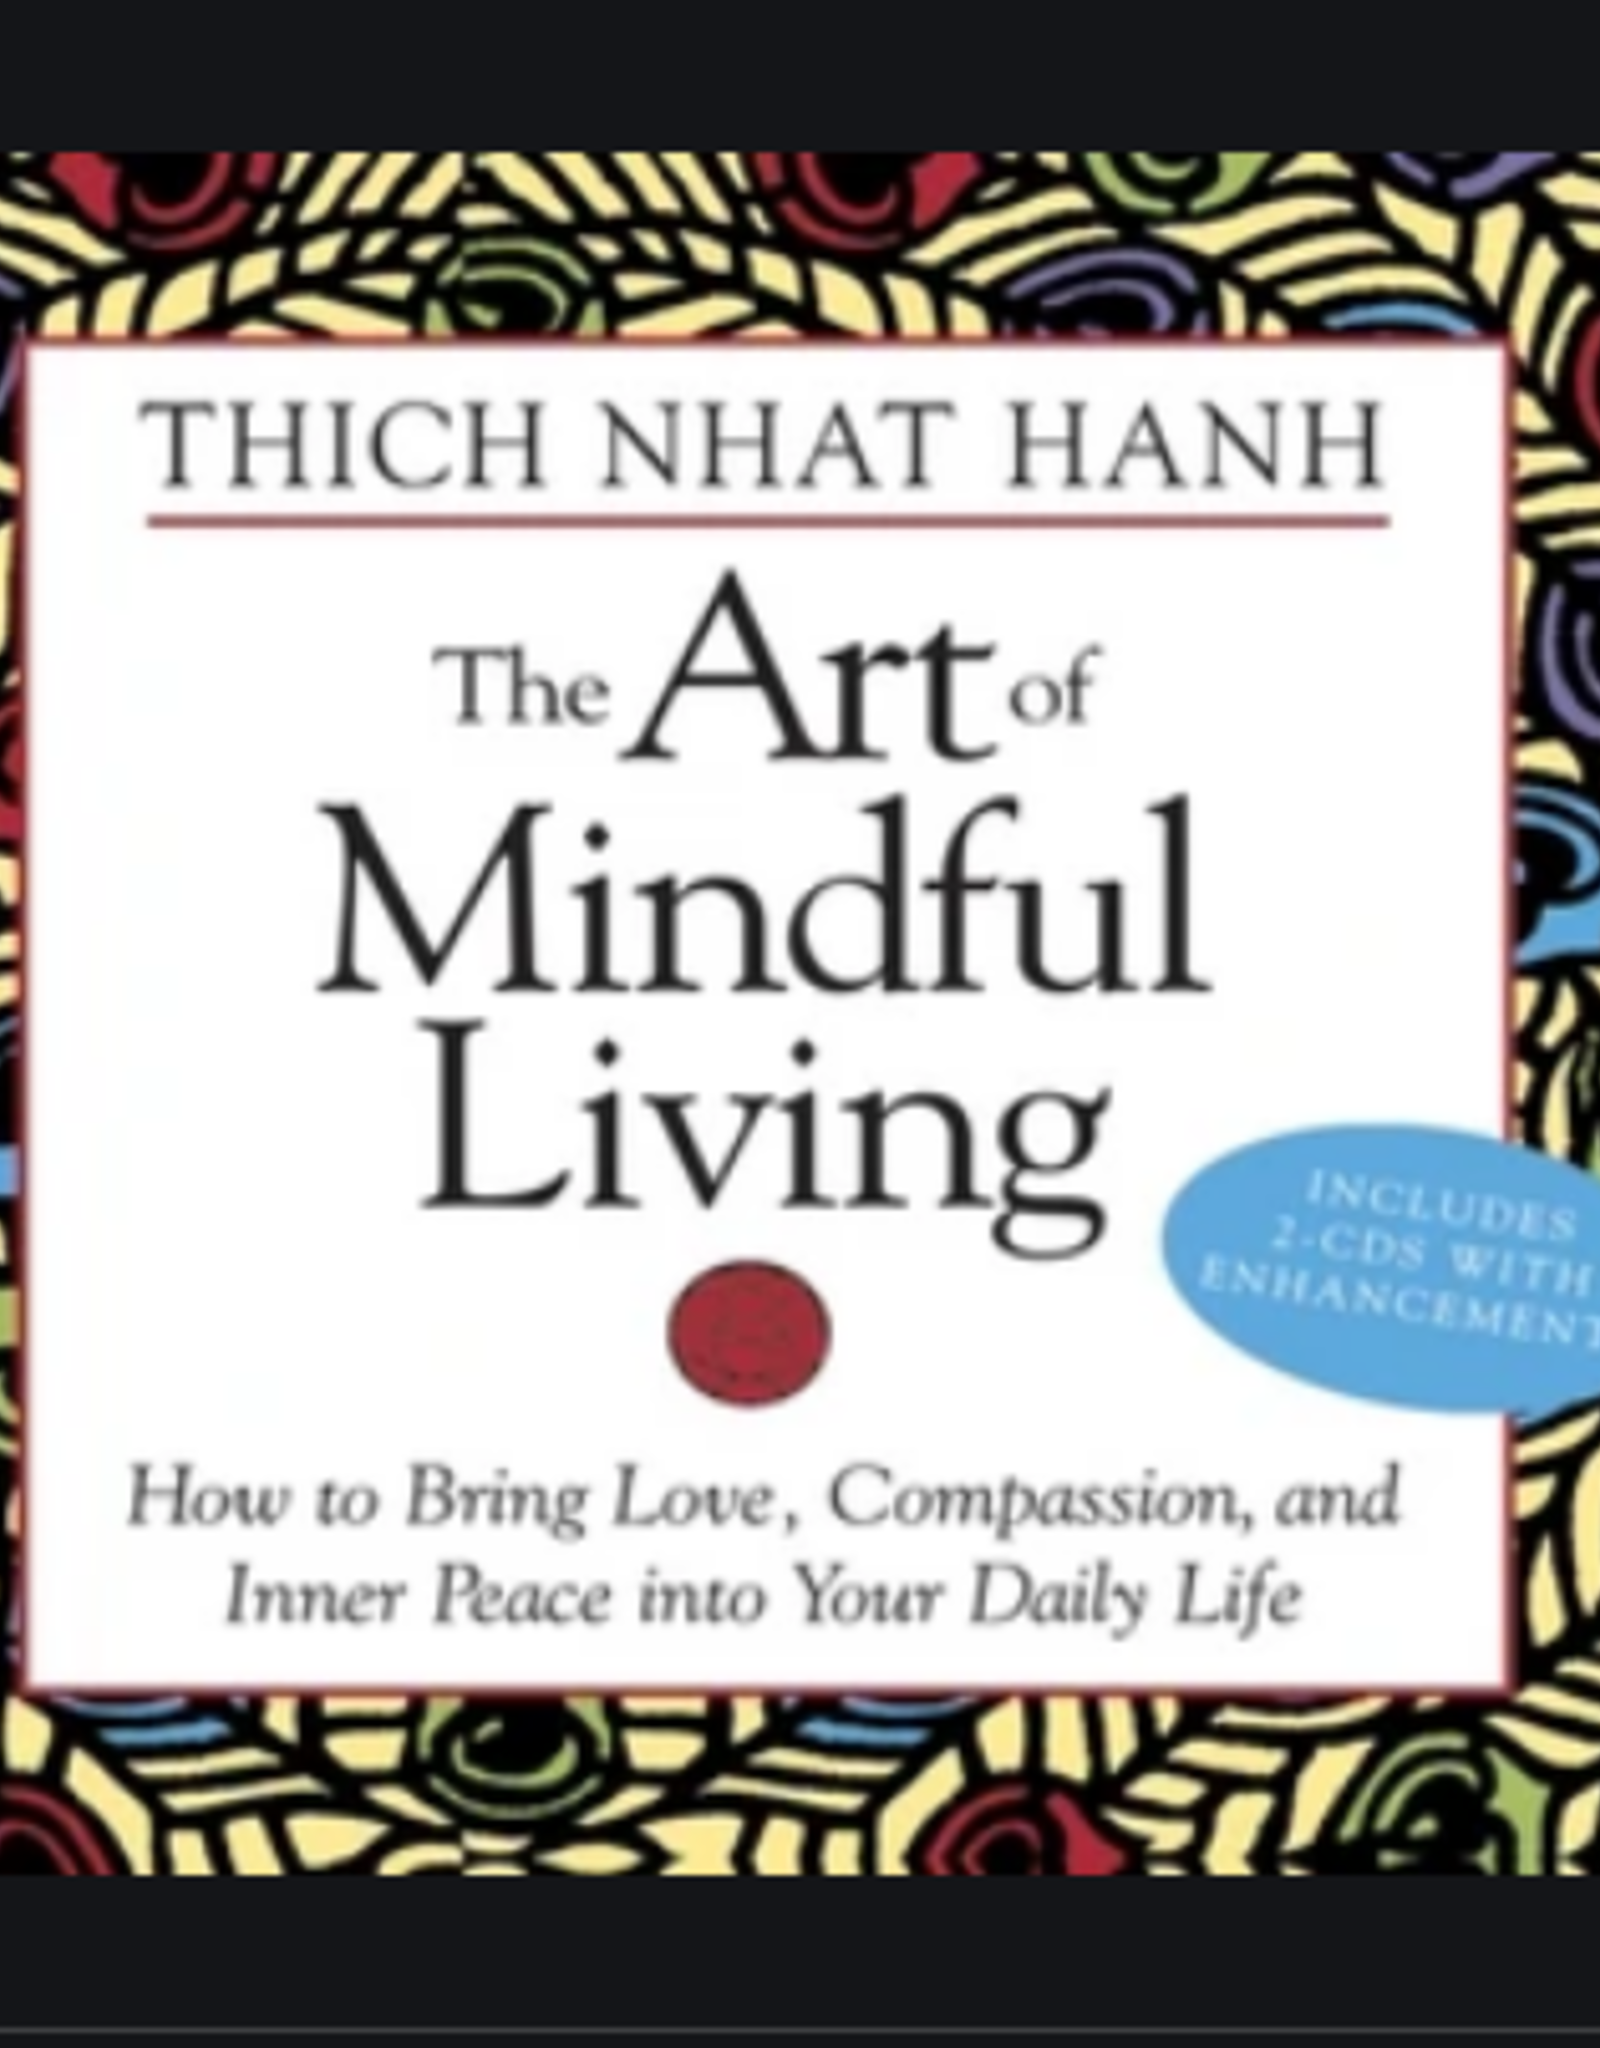 Thich Nhat Hanh Art of Mindful Living CD's by Thich Nhat Hanh